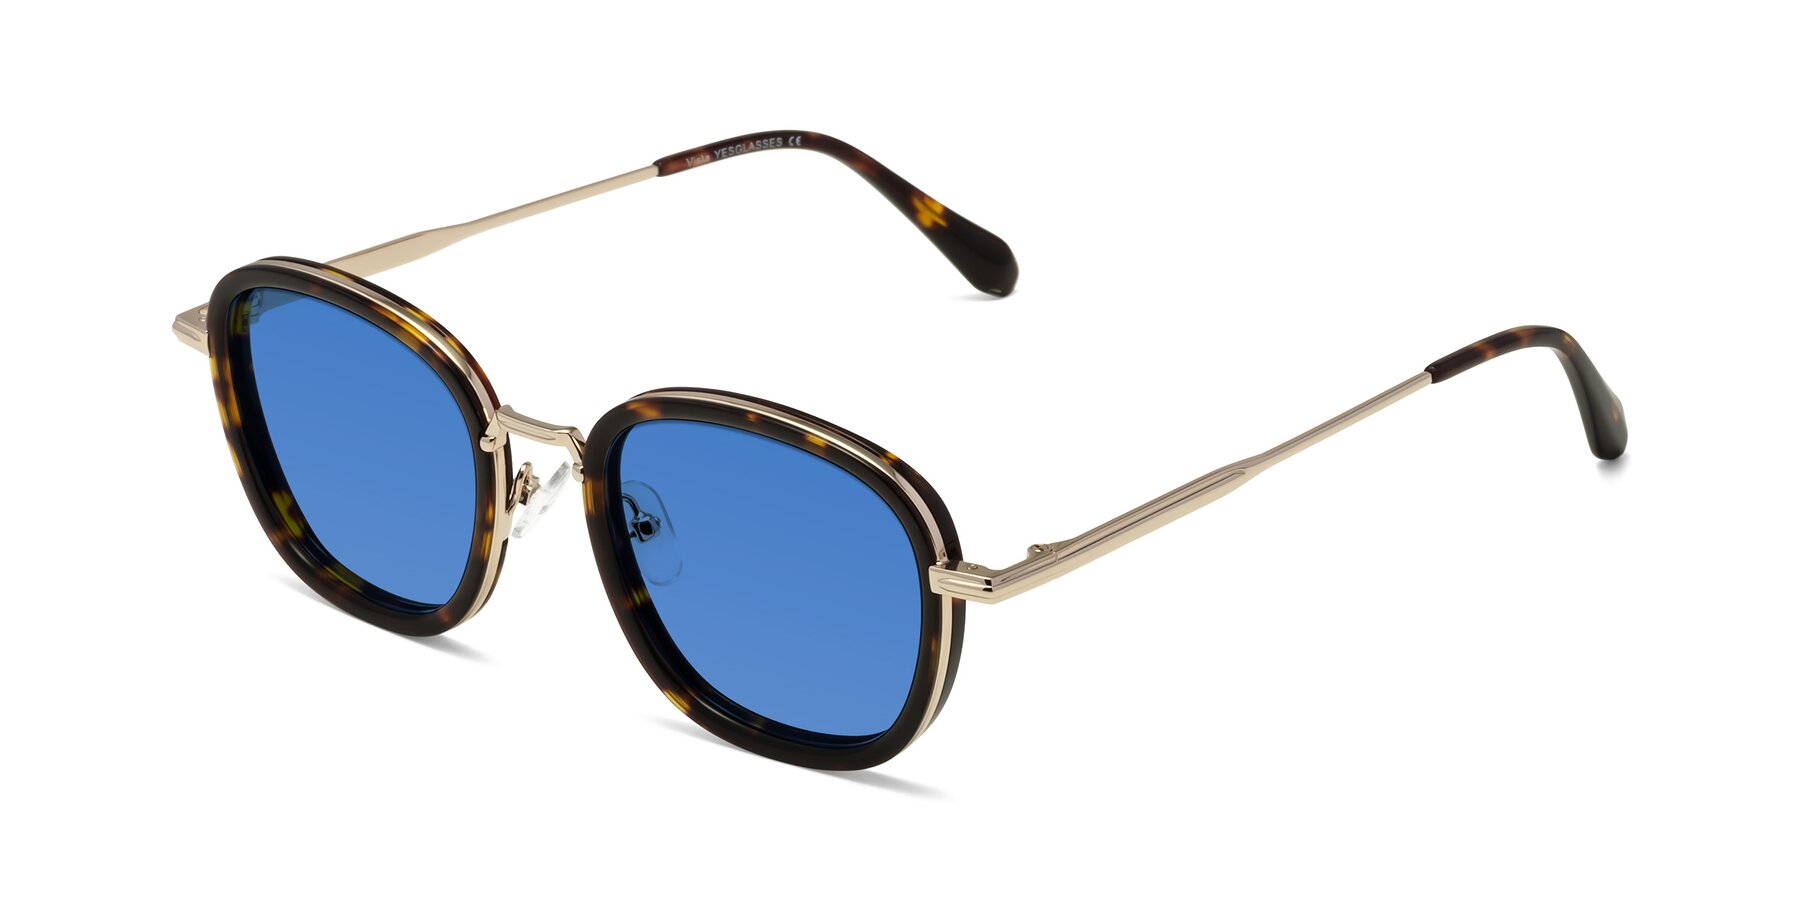 Angle of Vista in Tortoise-Light Gold with Blue Tinted Lenses